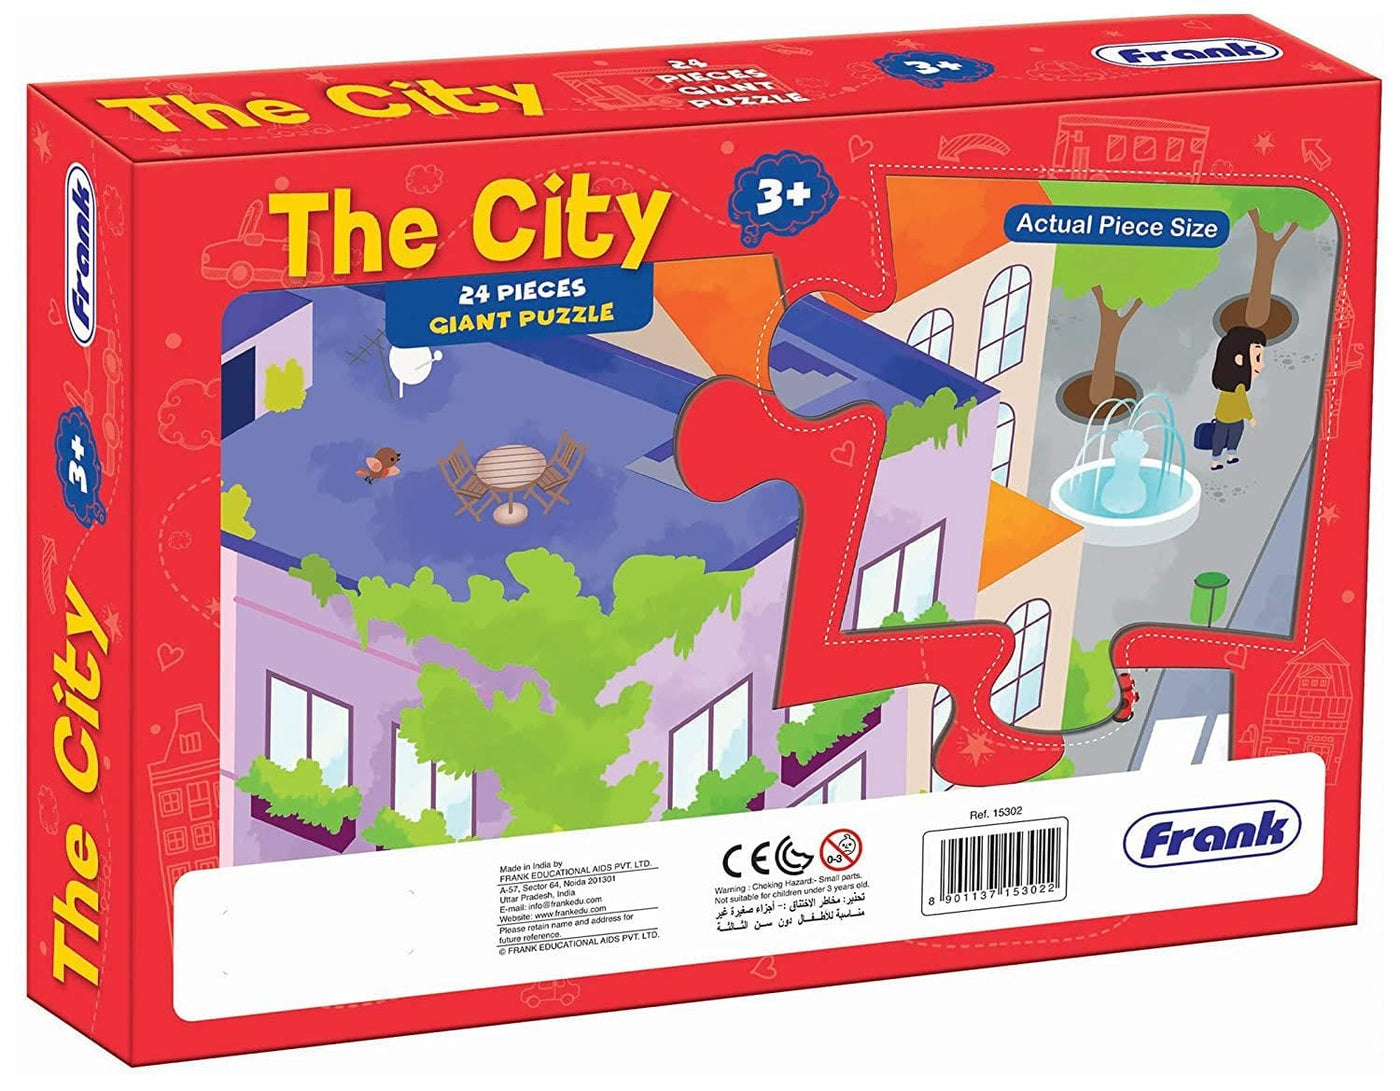 The City - 24 PCS Giant Floor Puzzle | Frank by Frank Puzzle